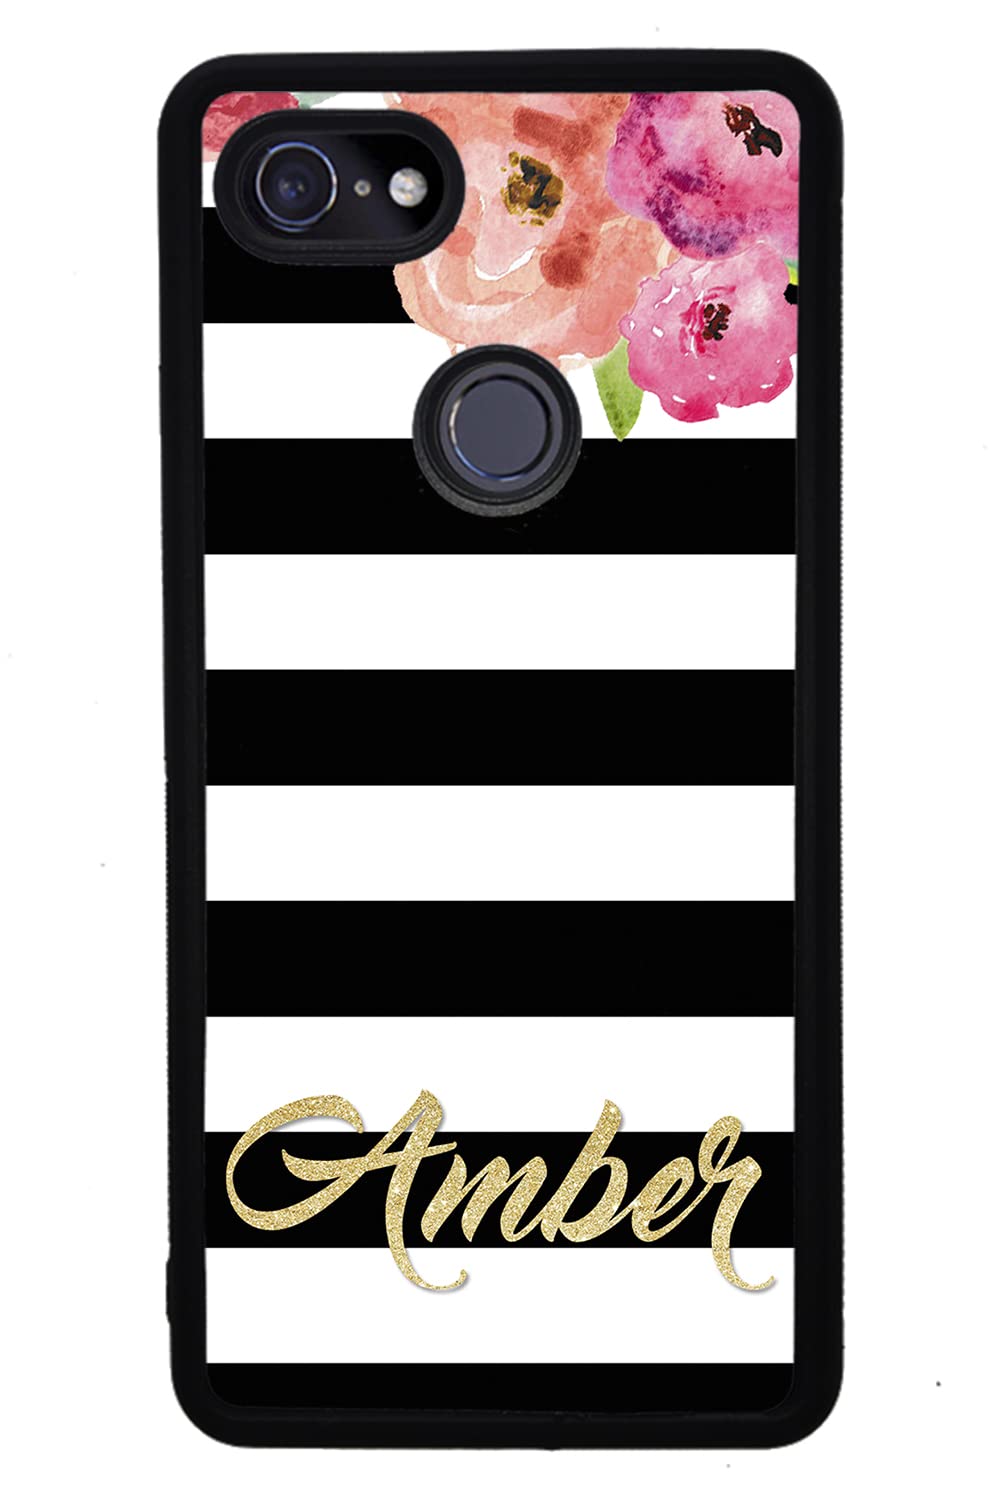 Golden Gold Personalized Flowers Black White Black Rubber Phone Case Compatible With Google Pixel 8 Pro, 8a, 8, 7a, 7, Pixel 7 Pro, 6a, Pixel 6 Pro, 6, 5, 4a 5G, 4a 4G, 4, 4 XL, 3a, 3a XL, 3